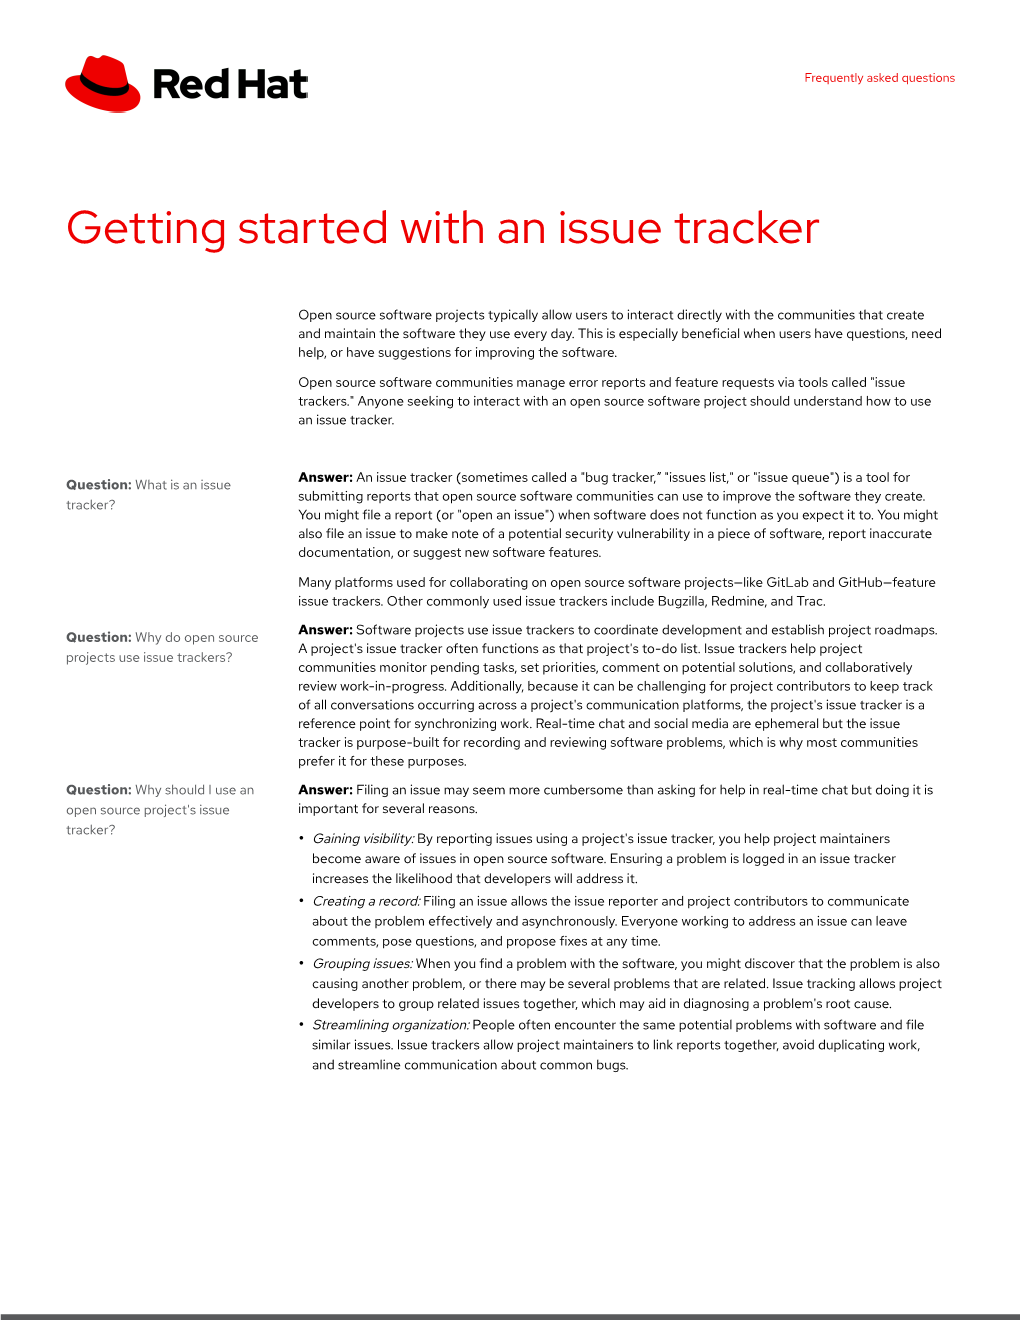 Getting Started with an Issue Tracker